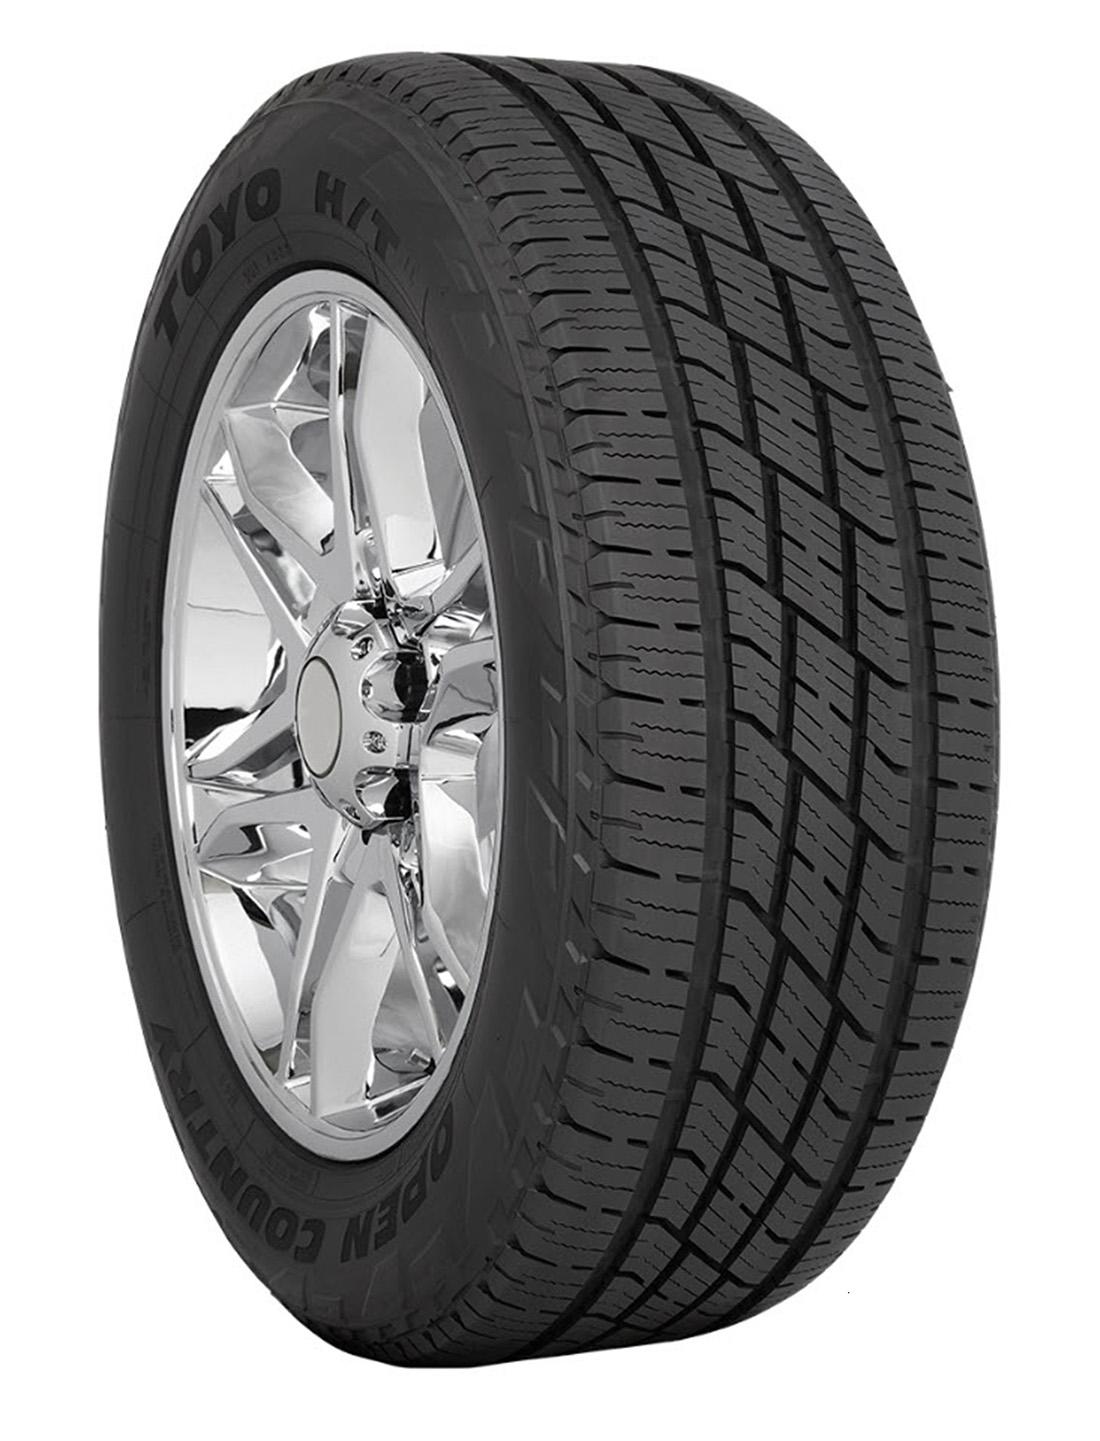 Toyo - PROXES HT  NW  225/65R17